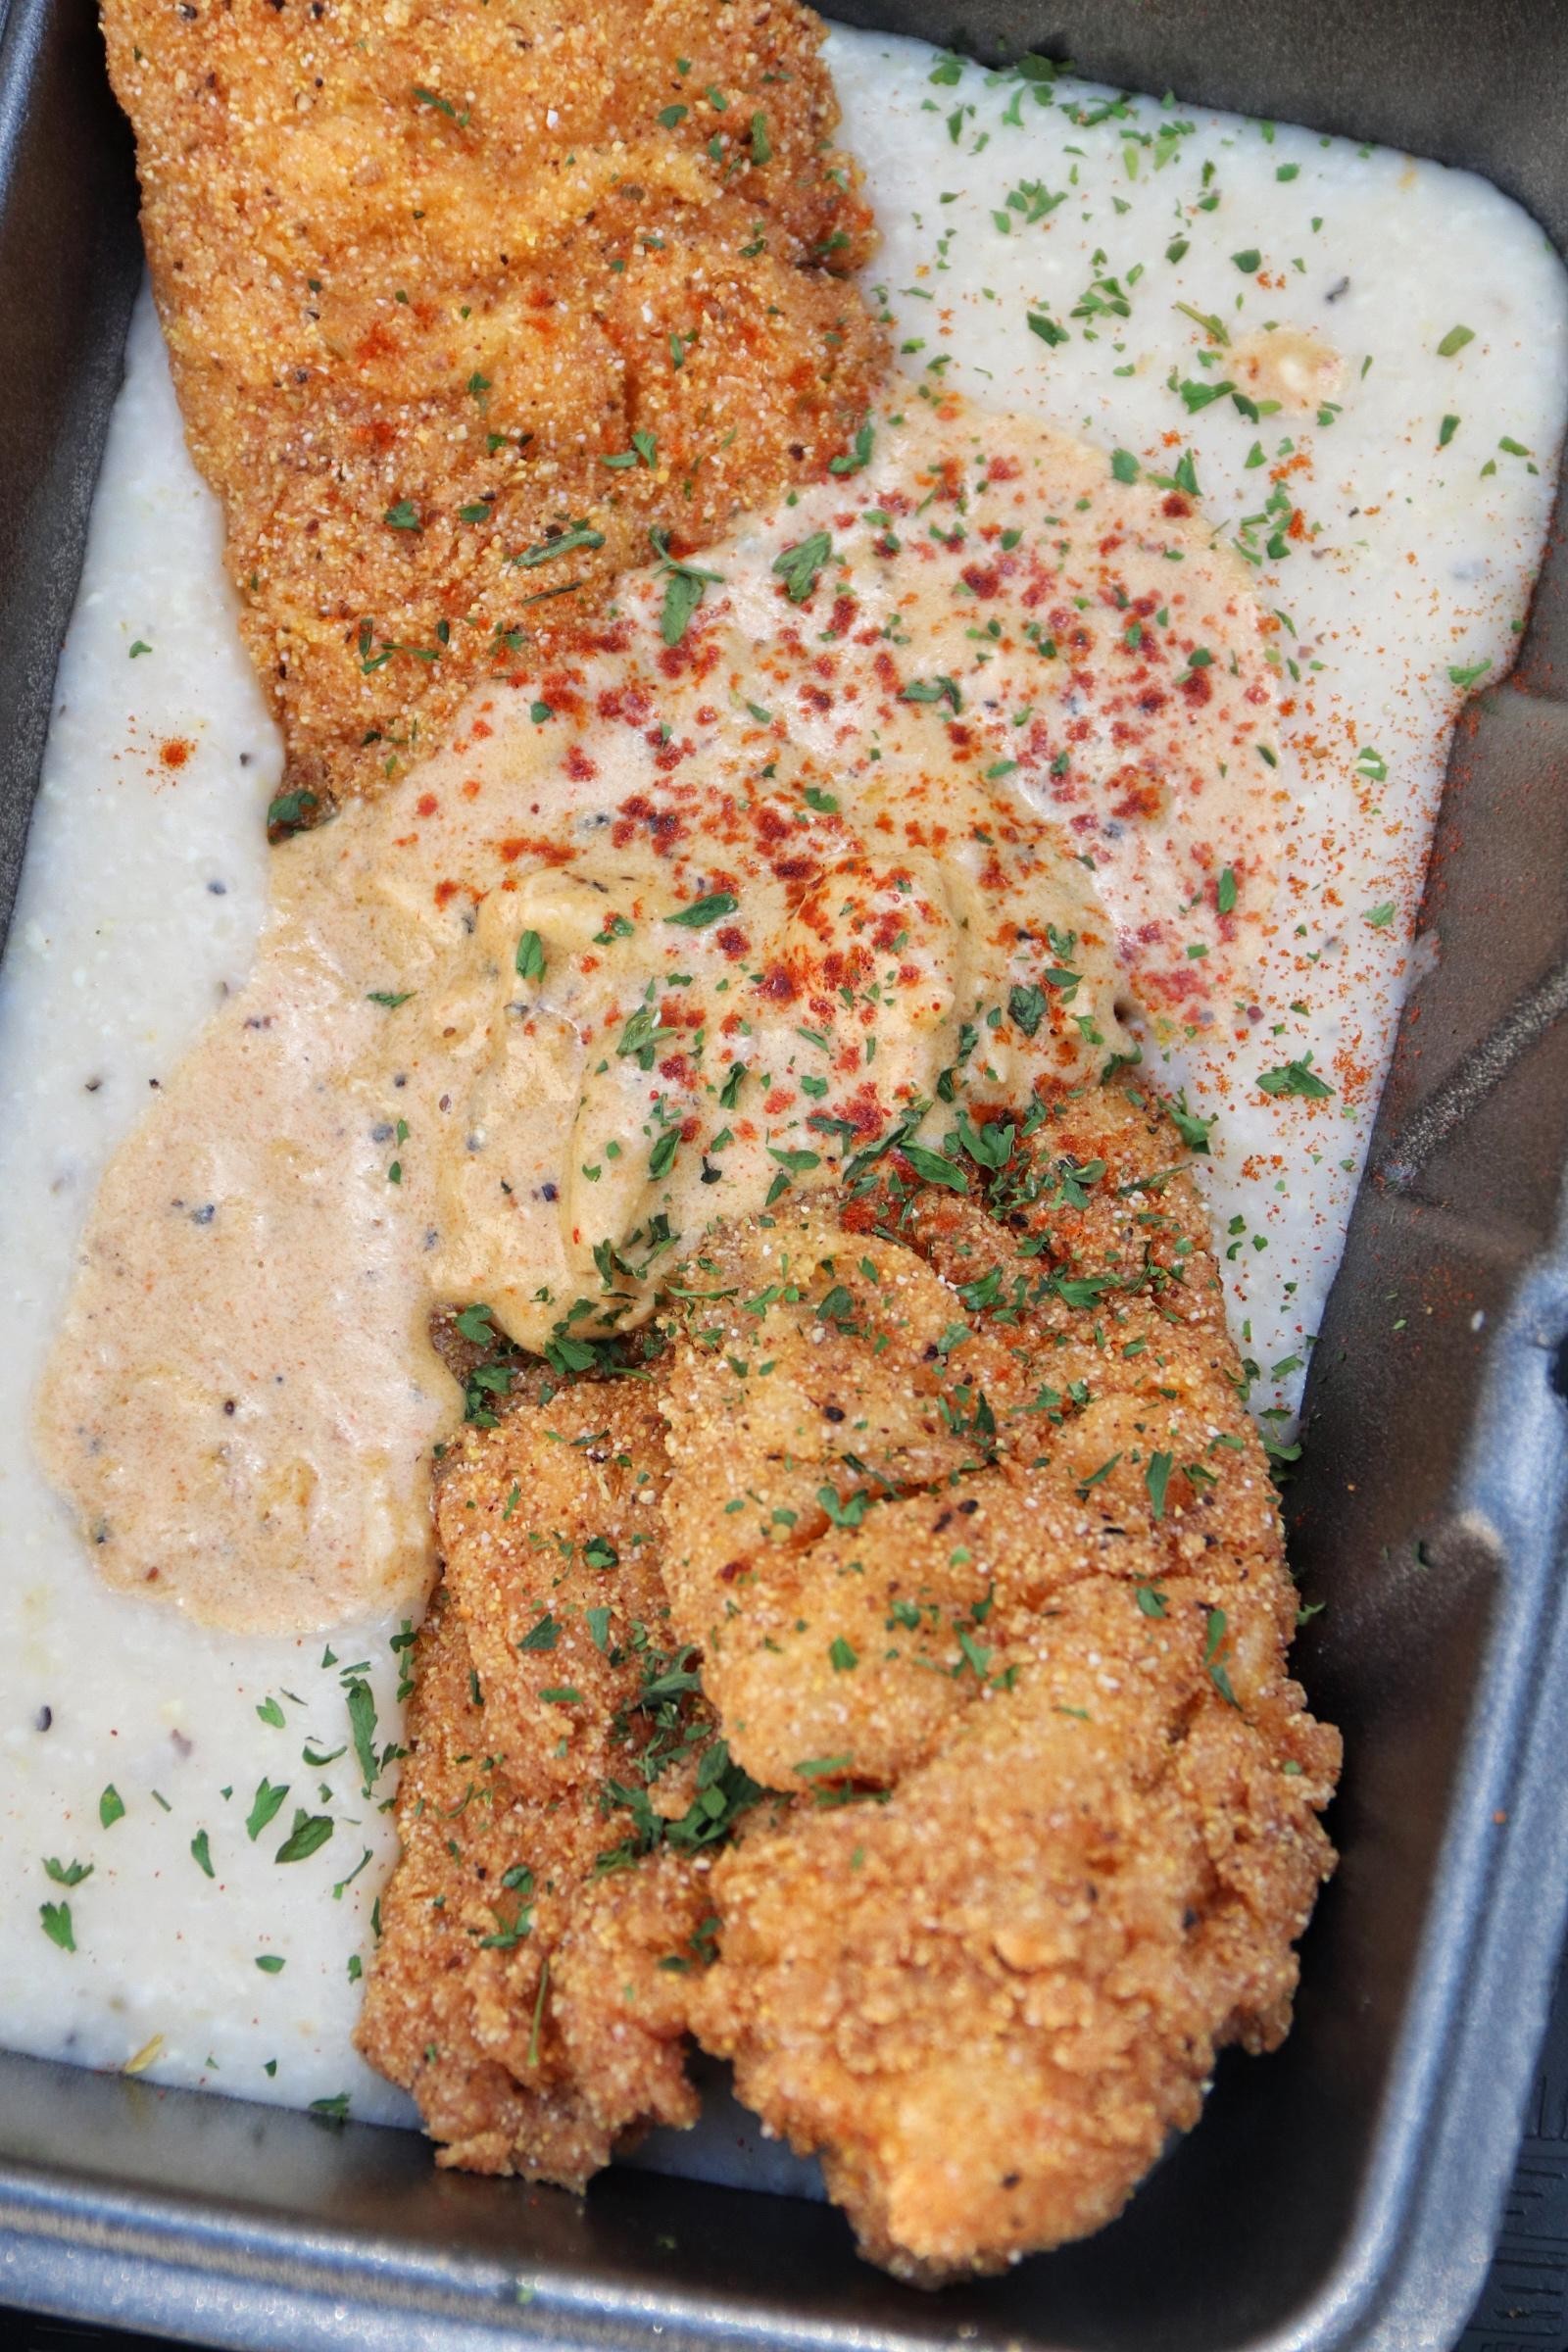 Fish and Grits